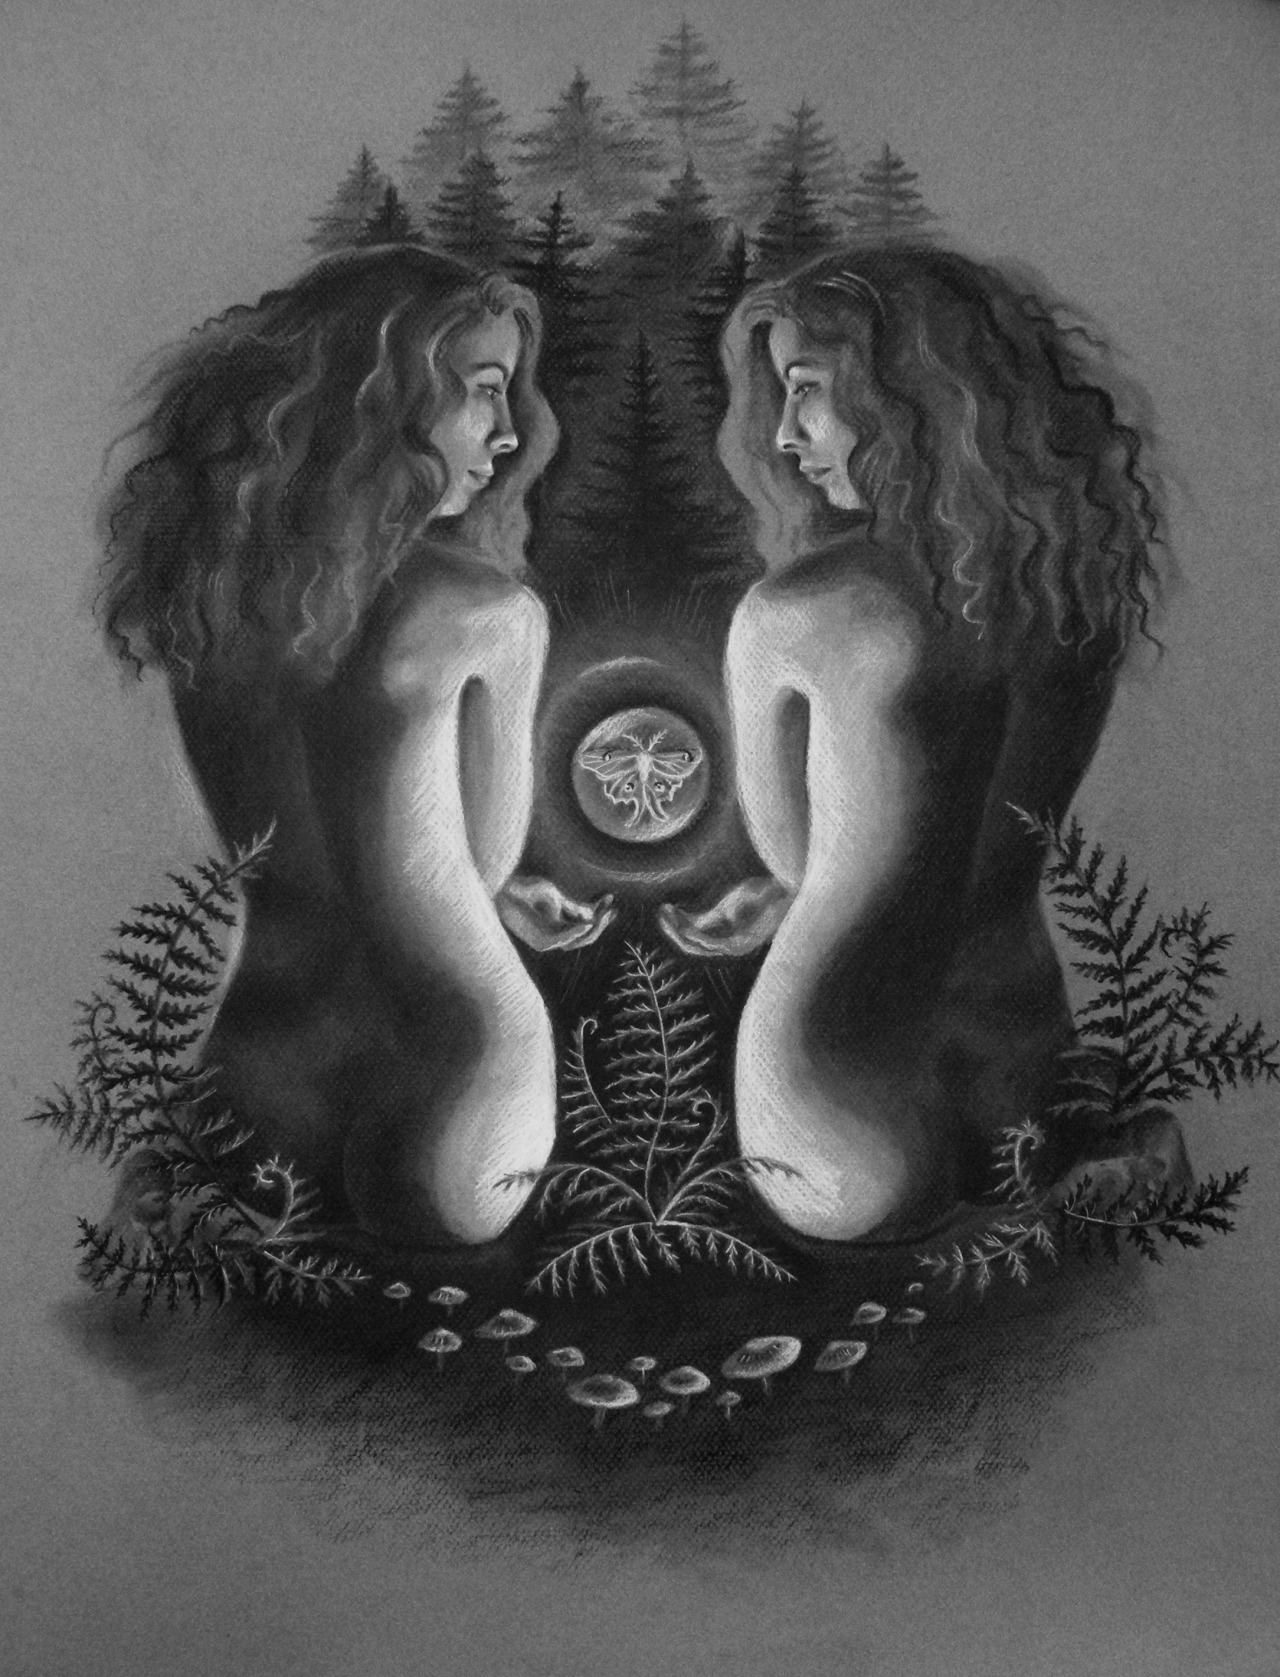 double self portrait in charcoal by Dayna Walton :-)) prints available here x